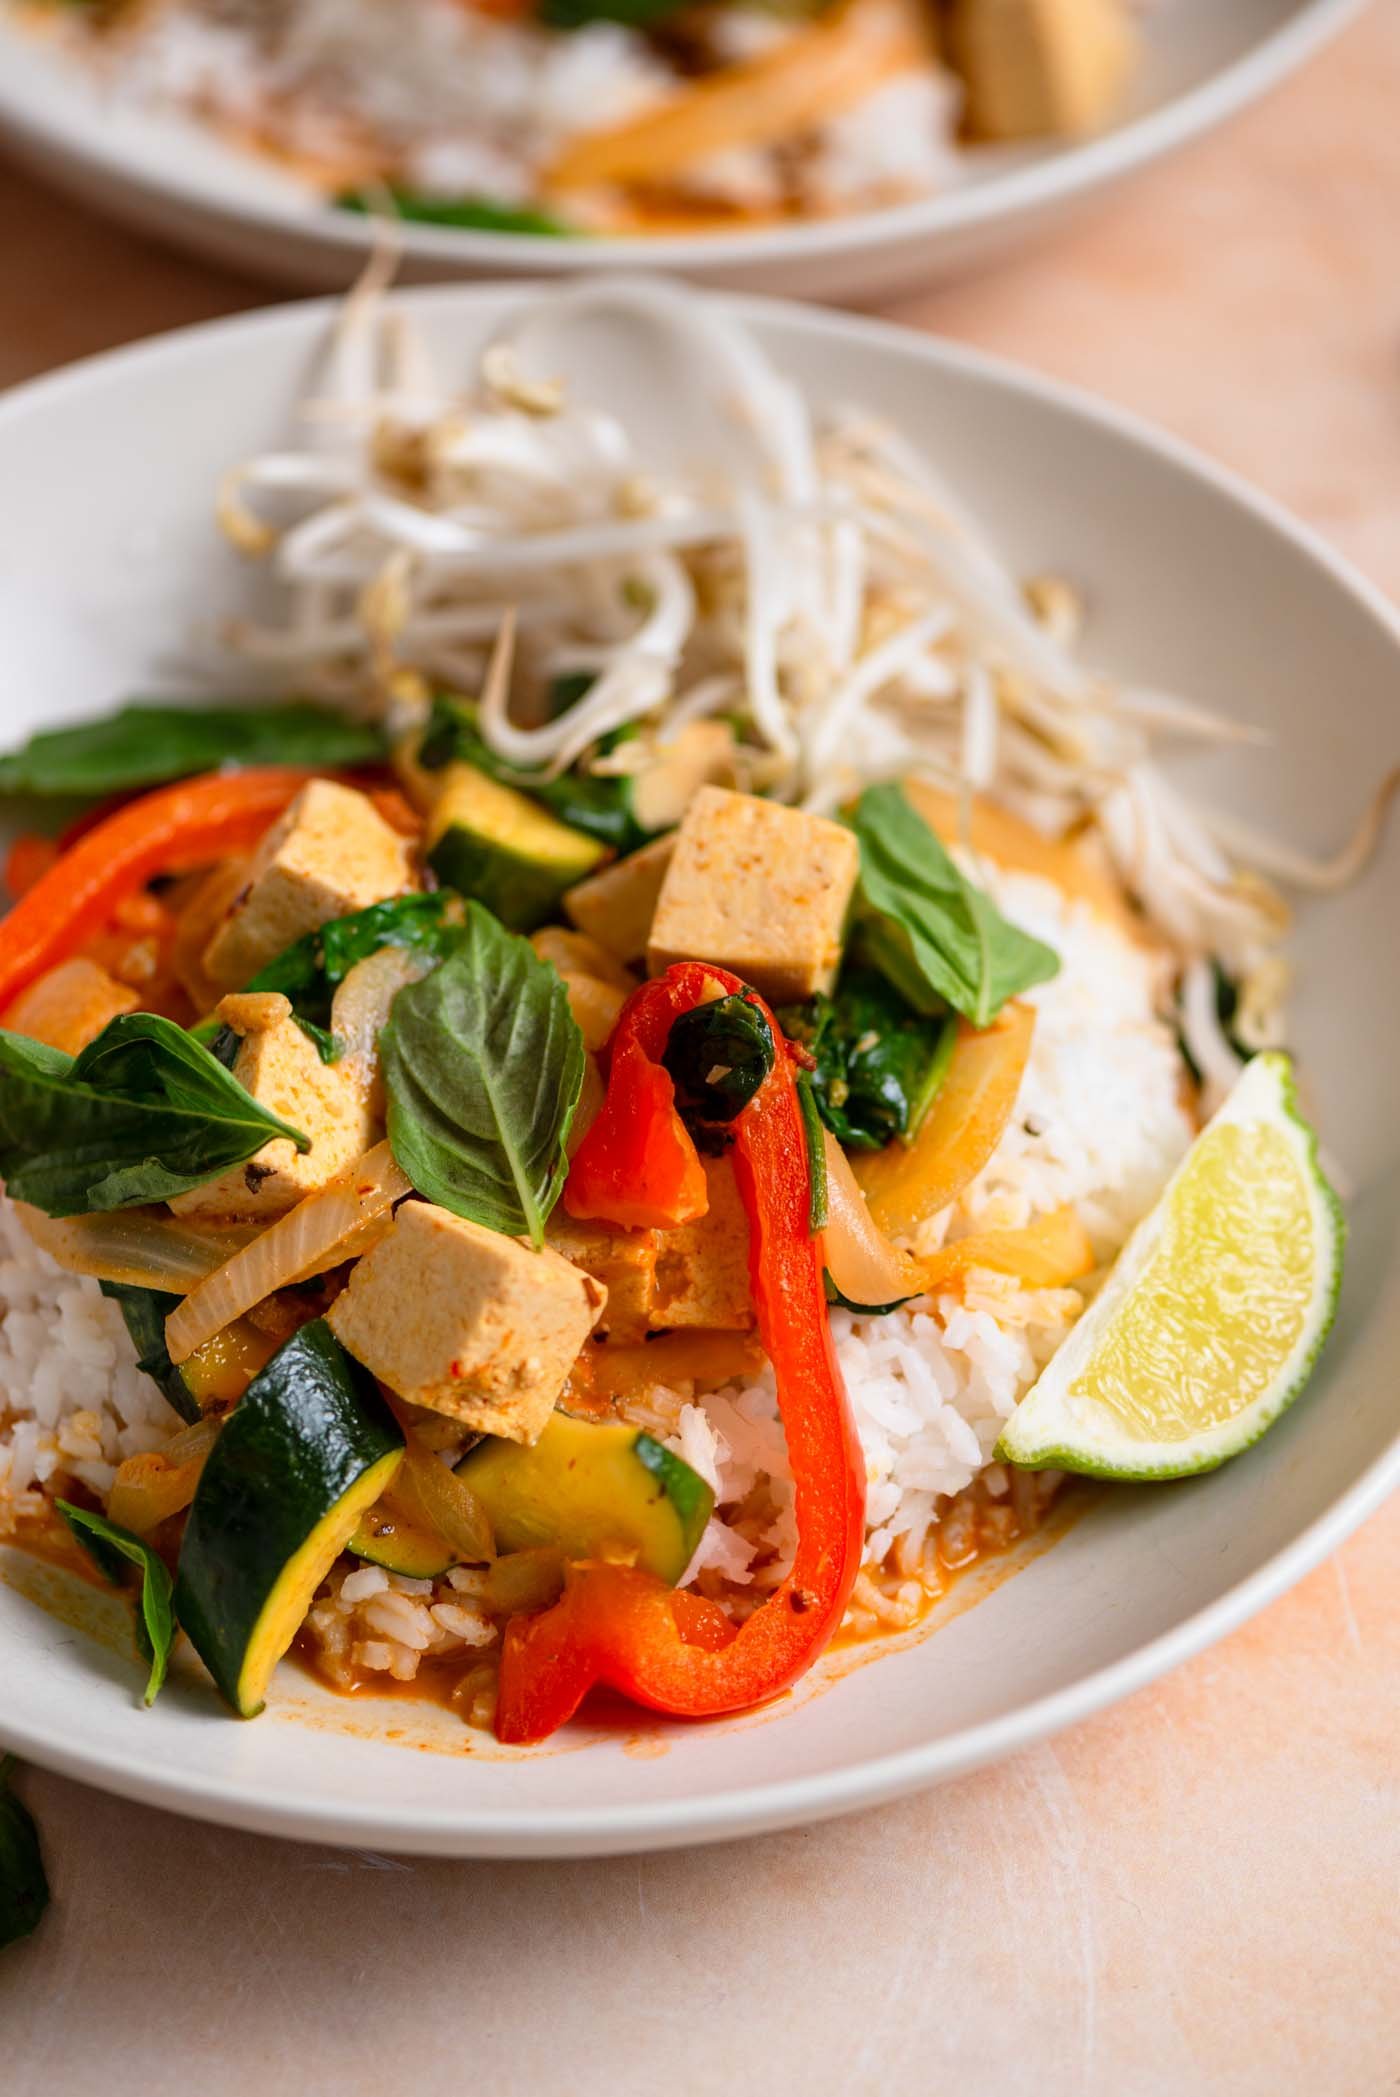 Bowl of Thai red curry with cubes of tofu, bell pepper and zucchini with fresh bean sprouts, basil leaves and a lime wedge.